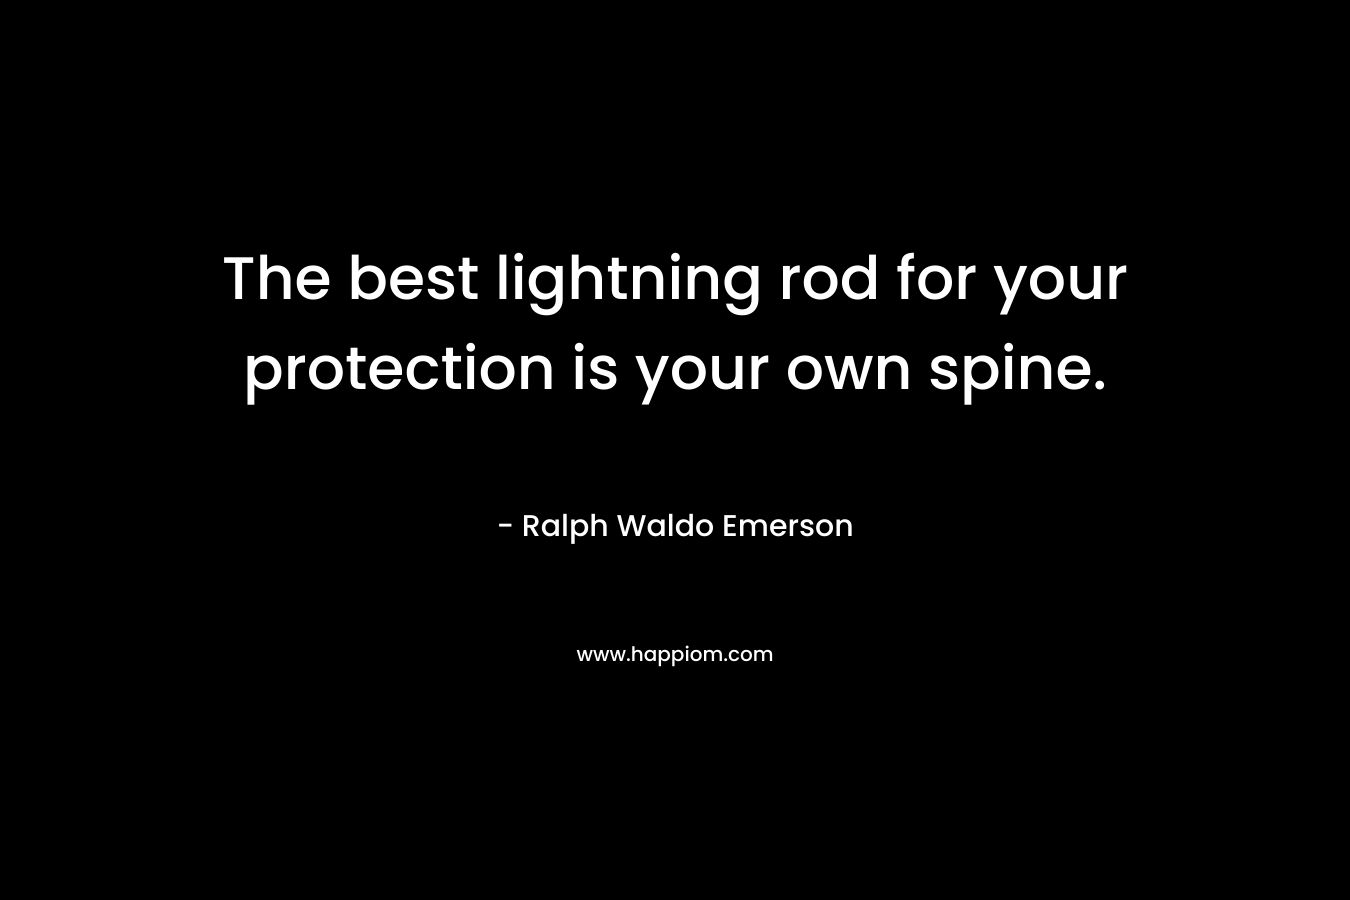 The best lightning rod for your protection is your own spine.